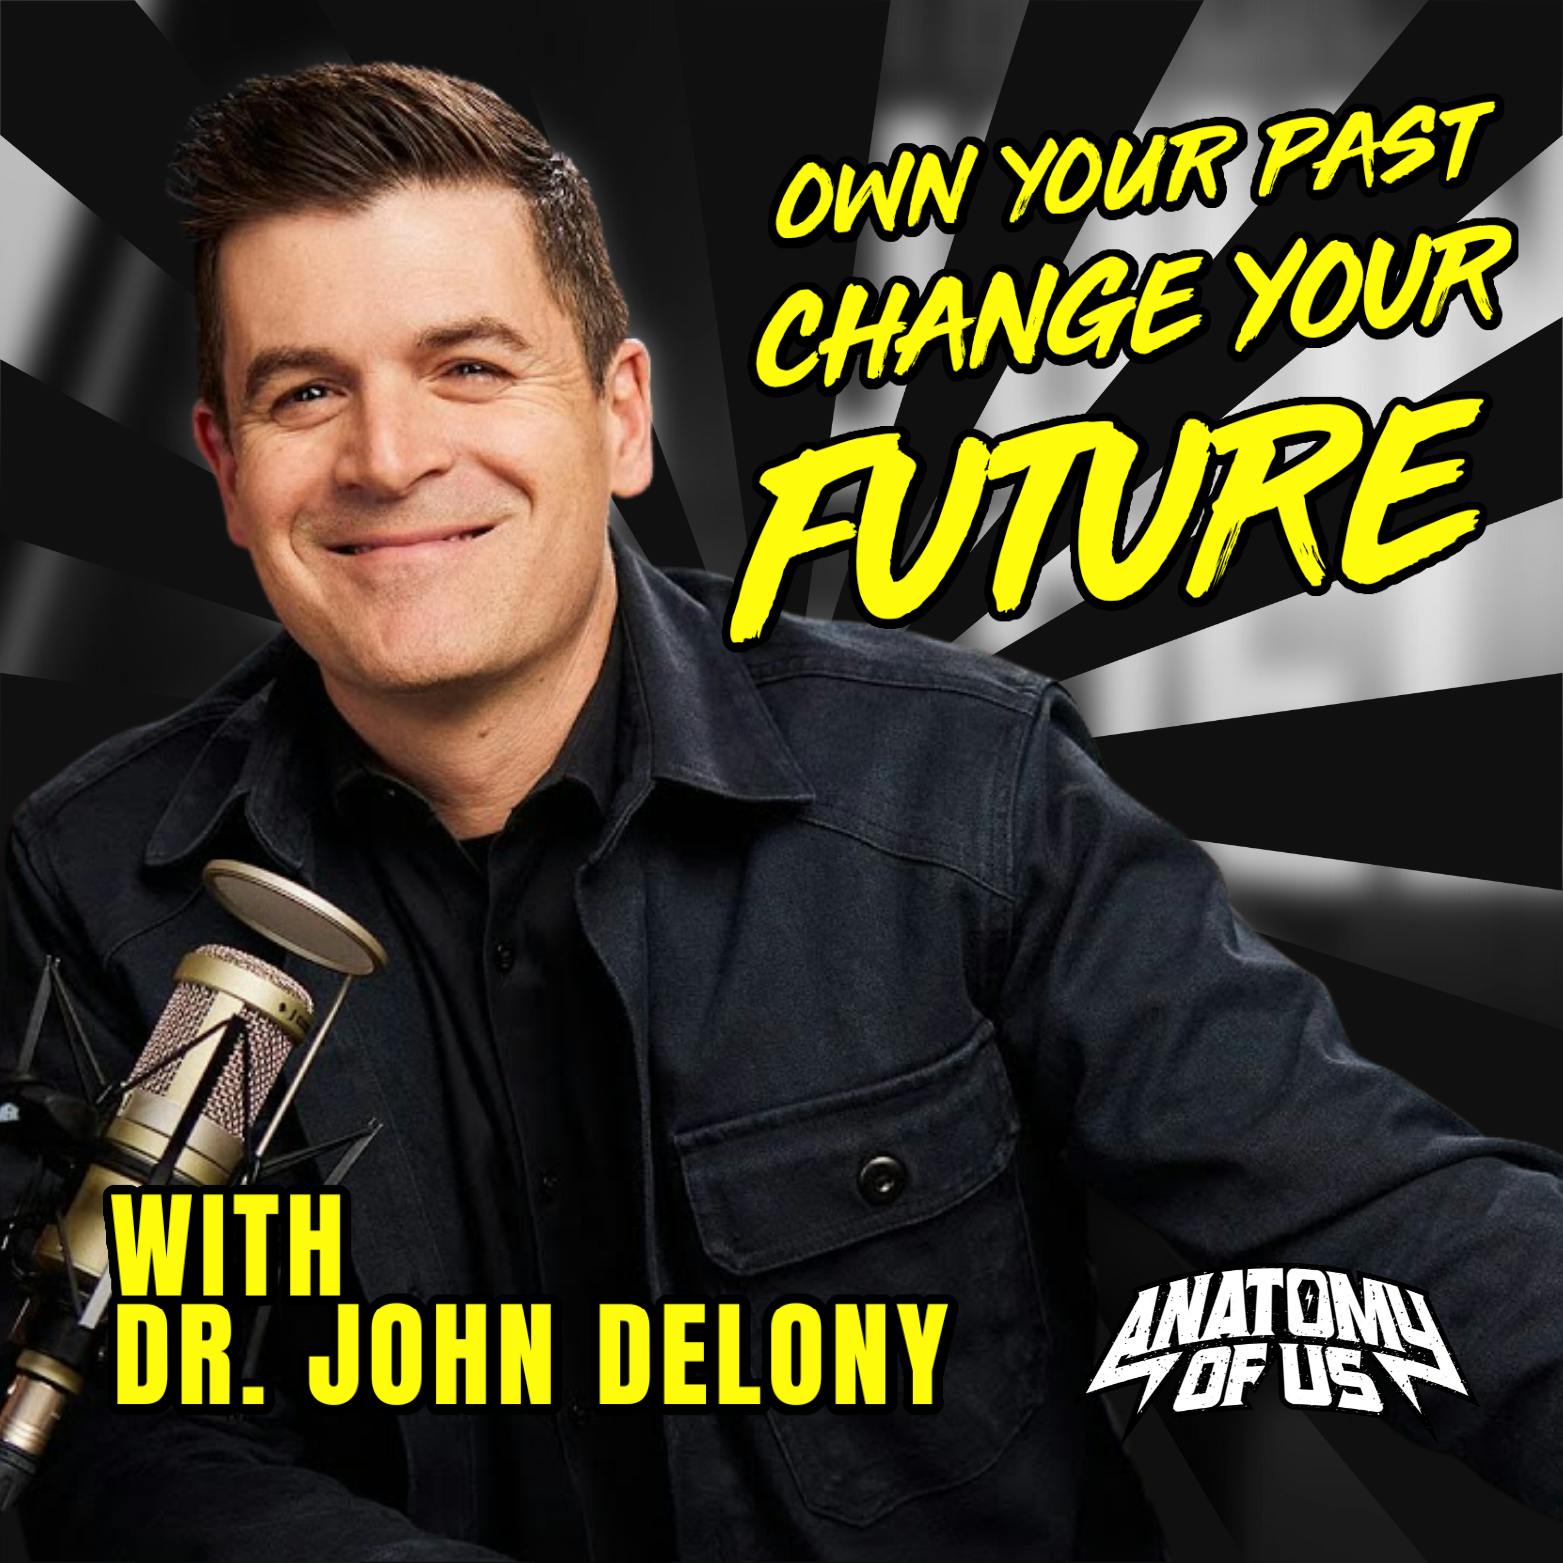 Own Your Past Change Your Future with Dr. John Delony